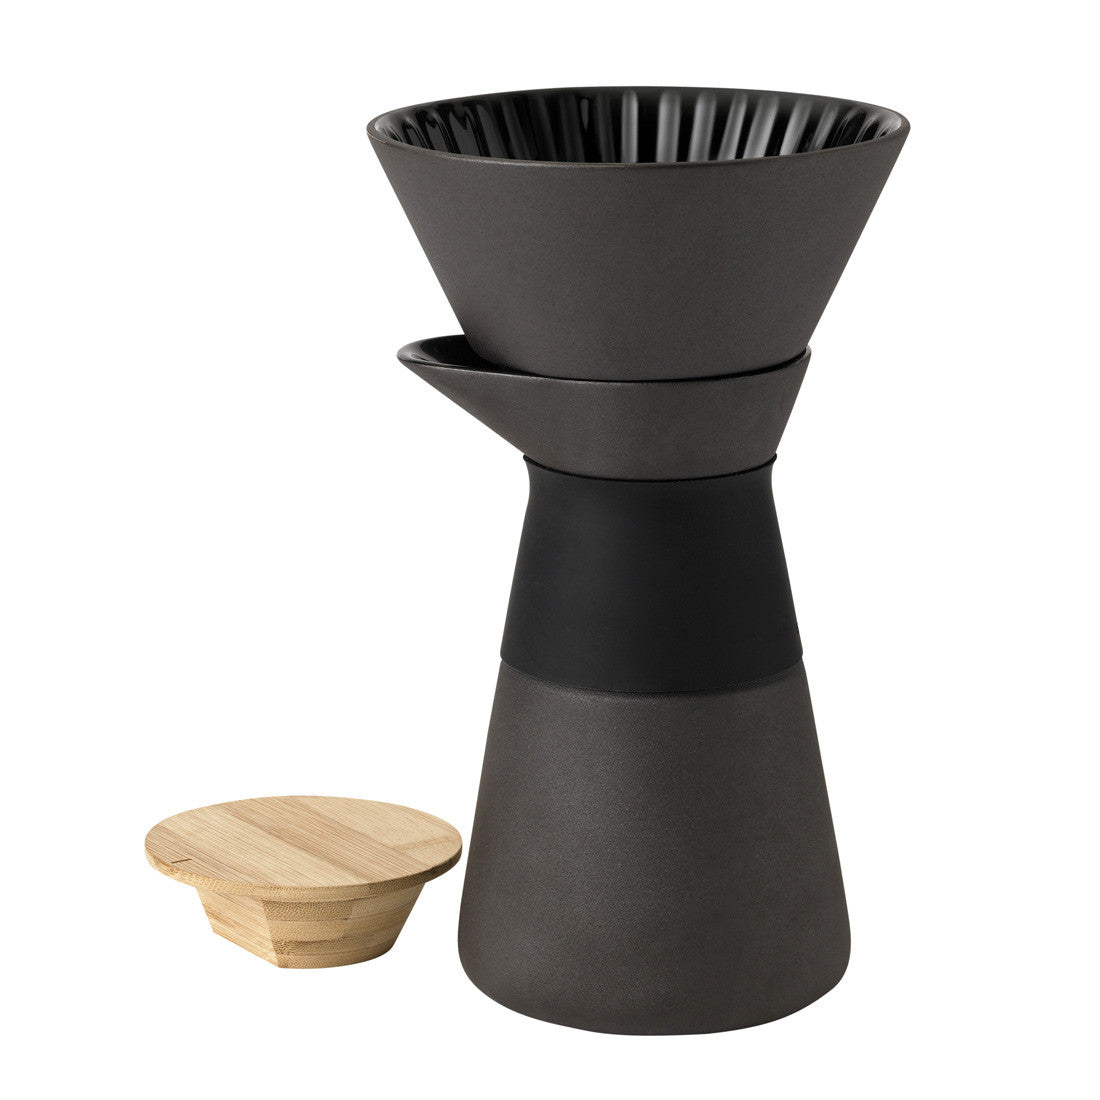 Theo Coffee Maker by Francis Cayouette